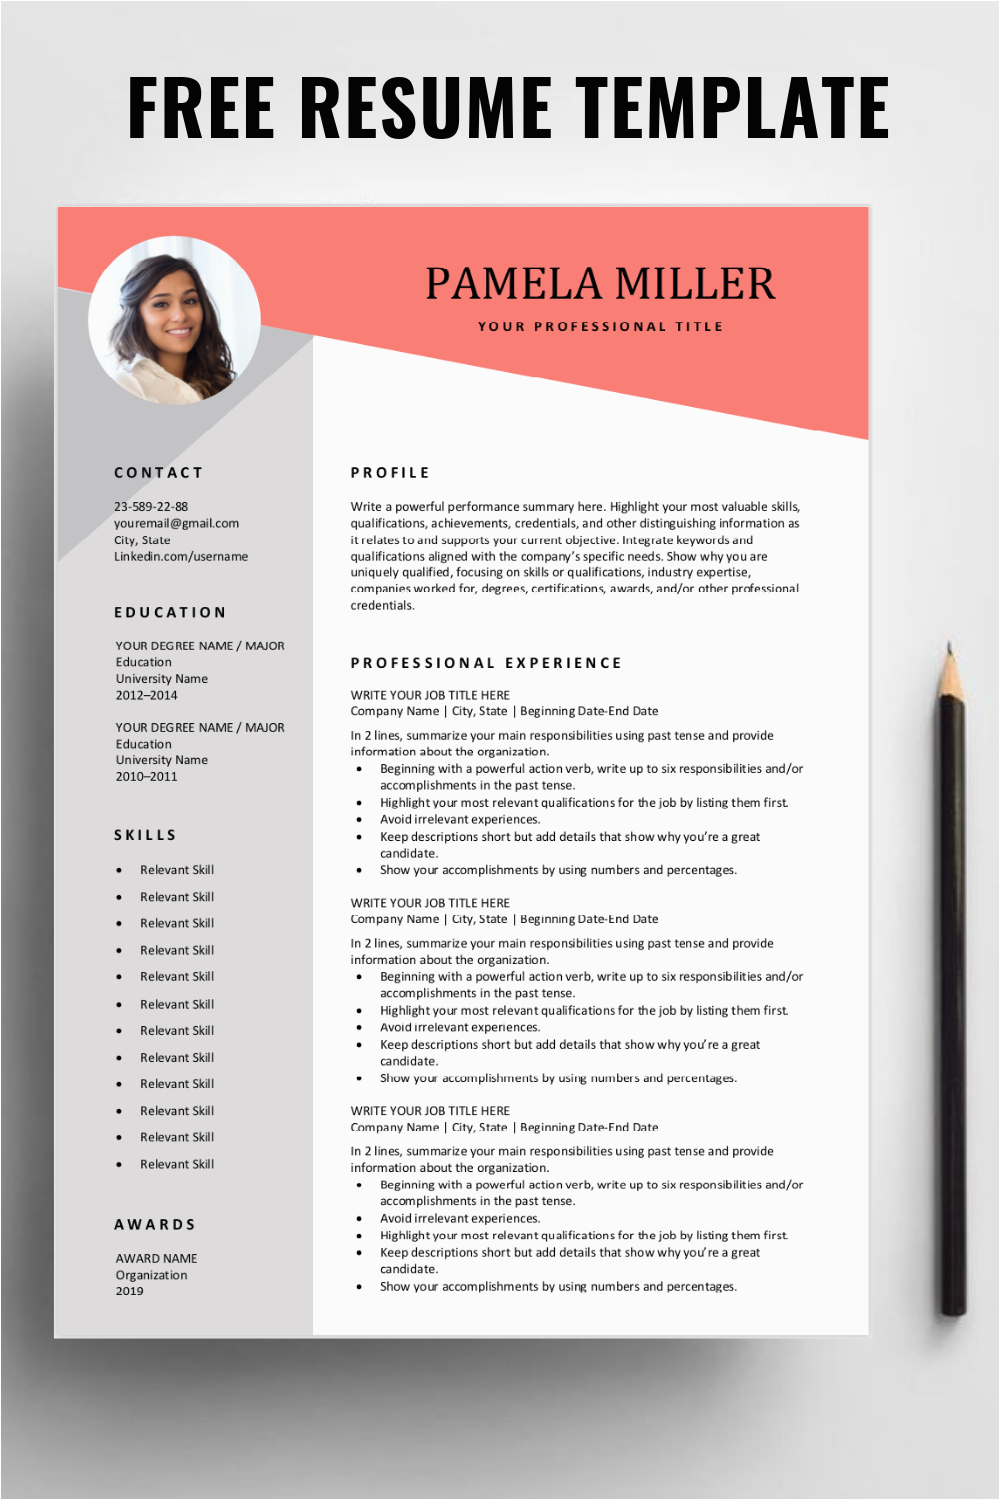 Free Download Resume Templates with Photo Free Resume Template